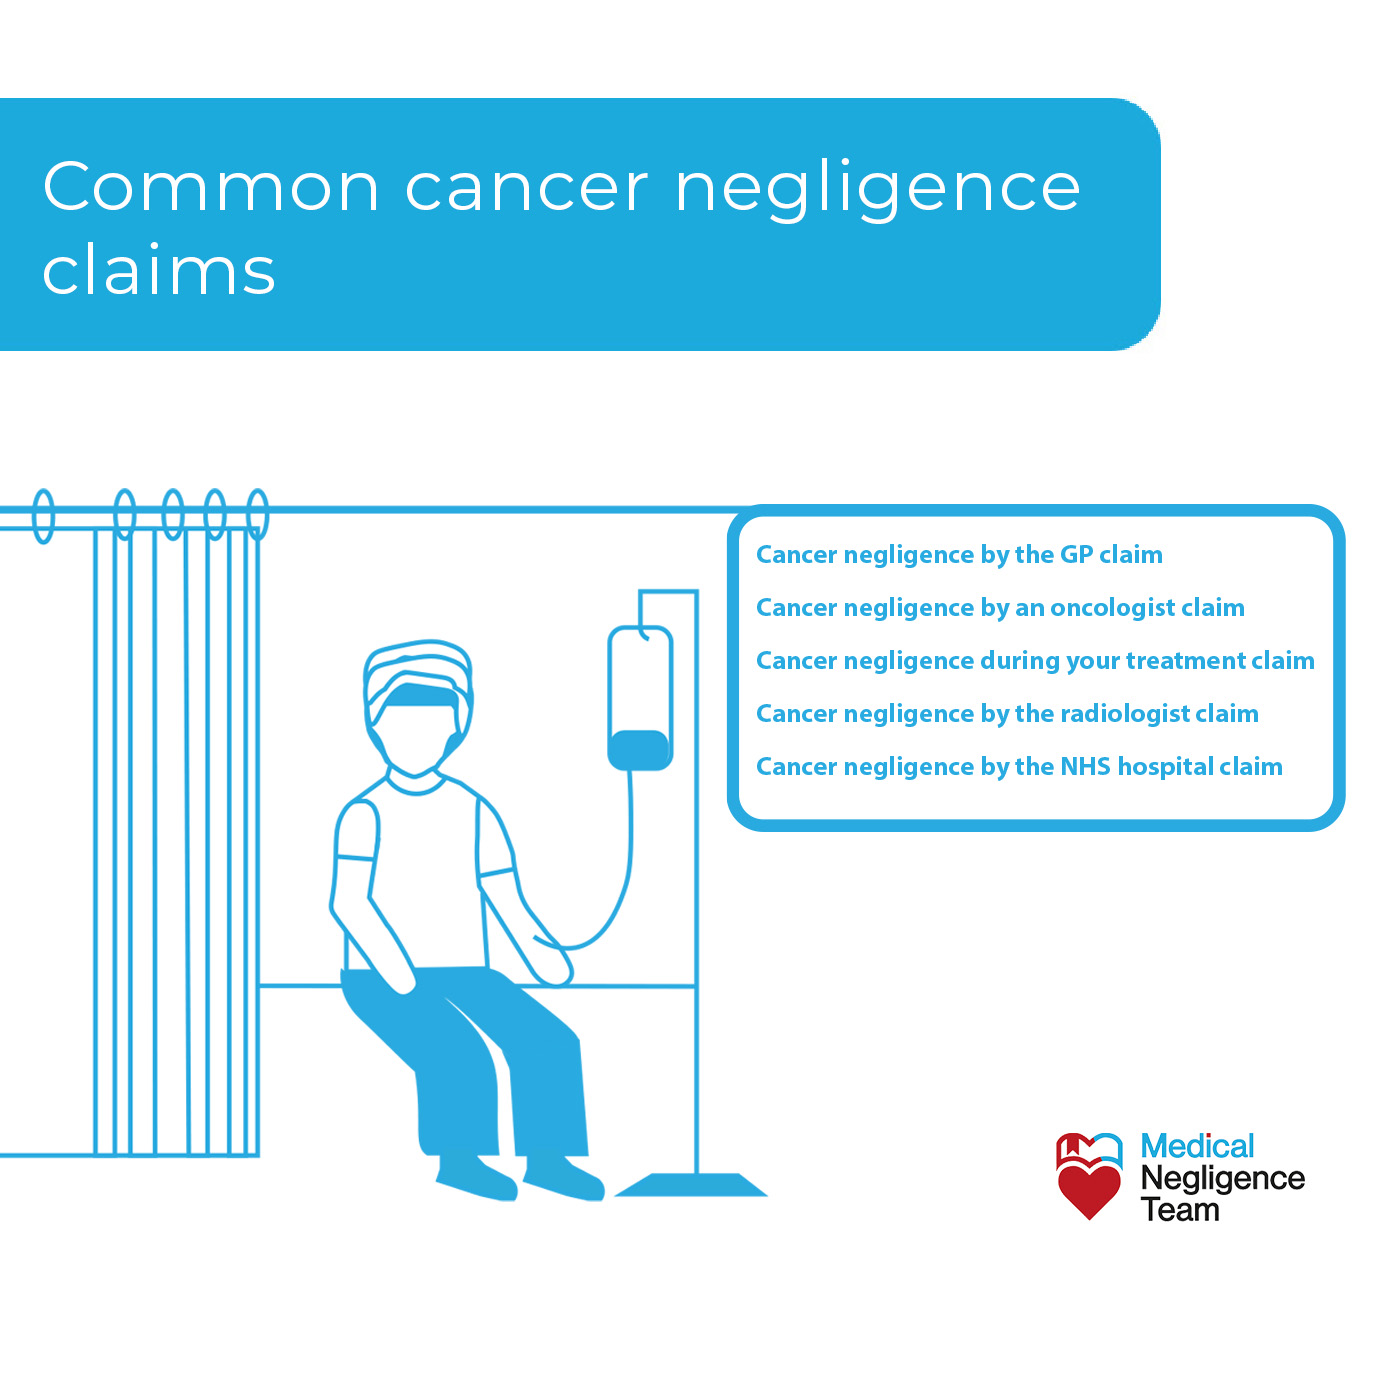 Common claims for cancer negligence